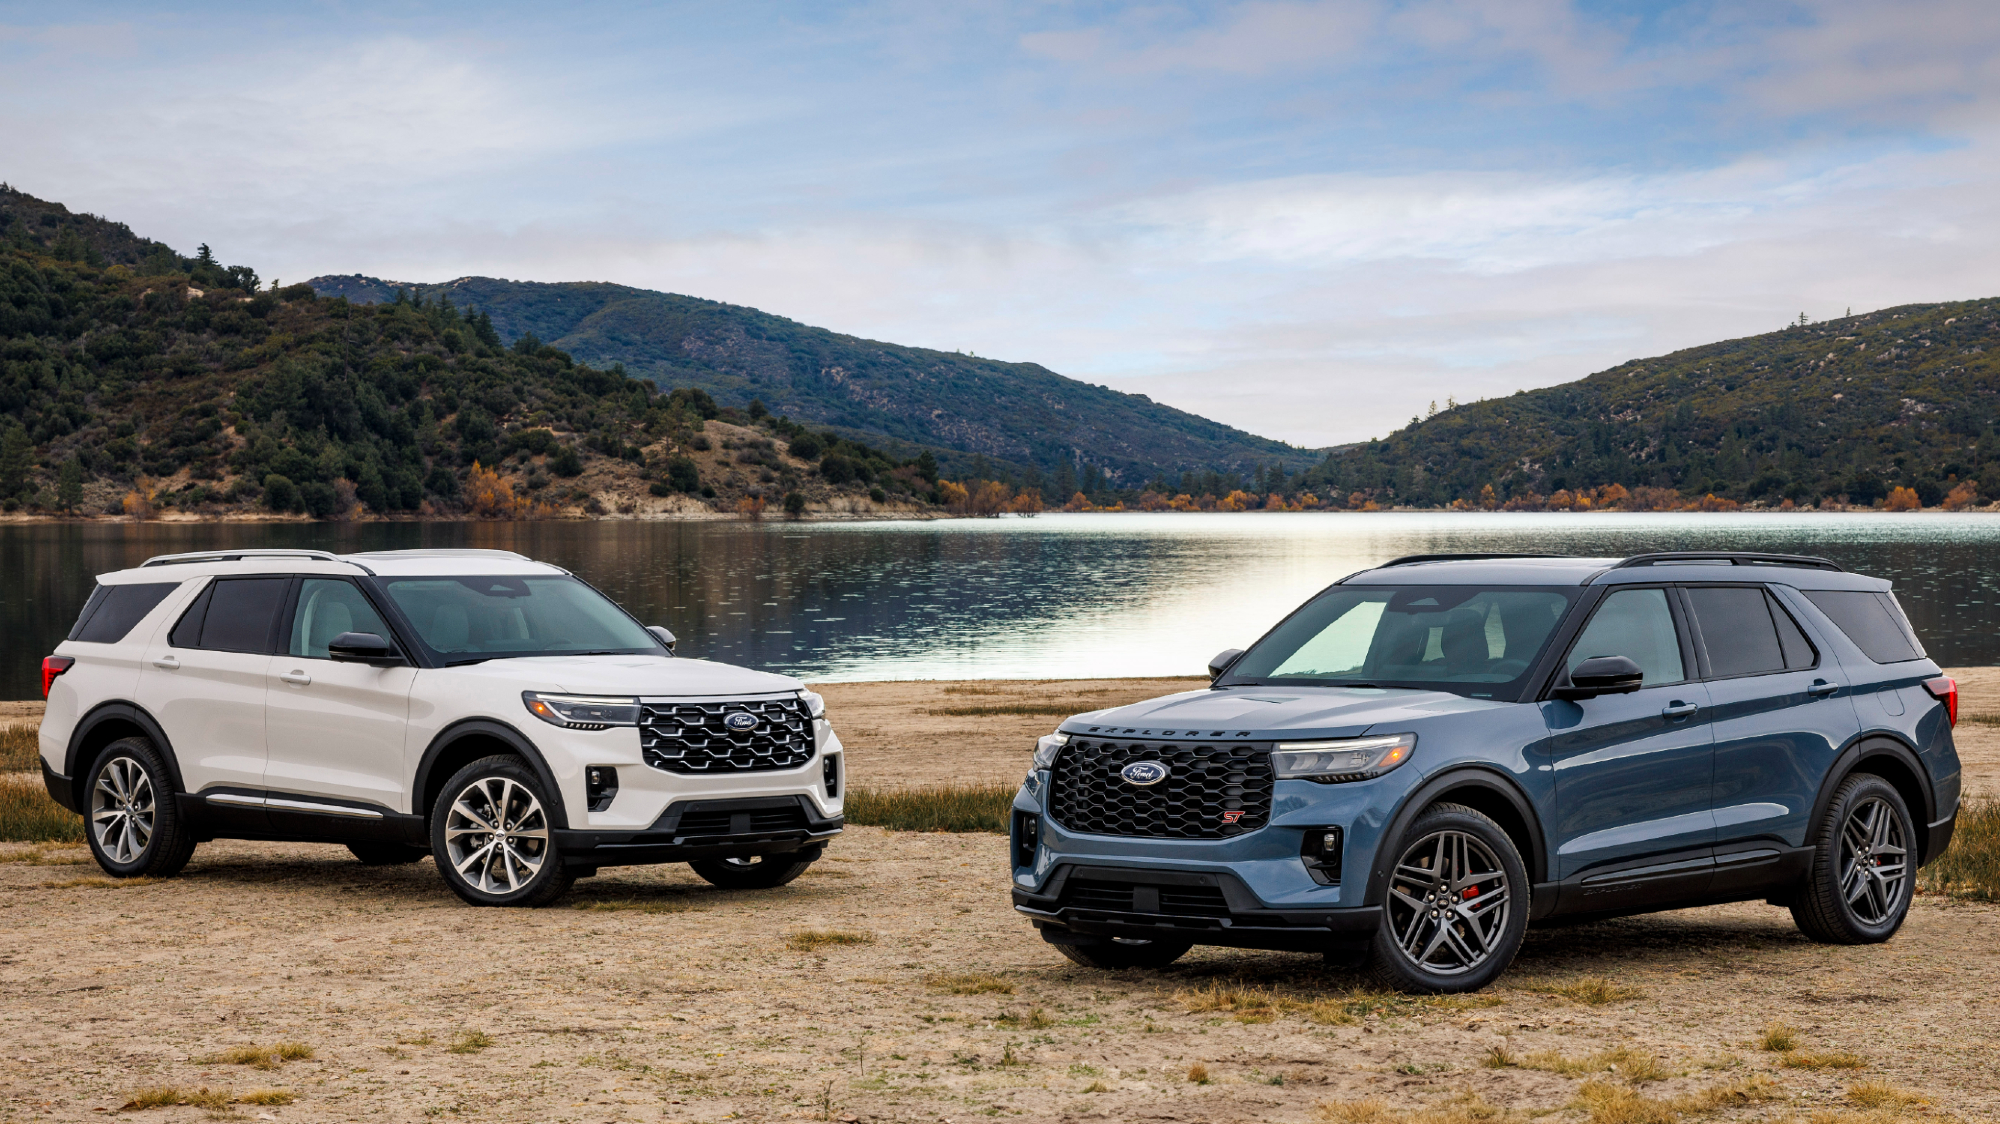 2025 Ford Explorer Platinum and 2025 Ford Explorer ST barked on stones by lakeside with moutains in the background.